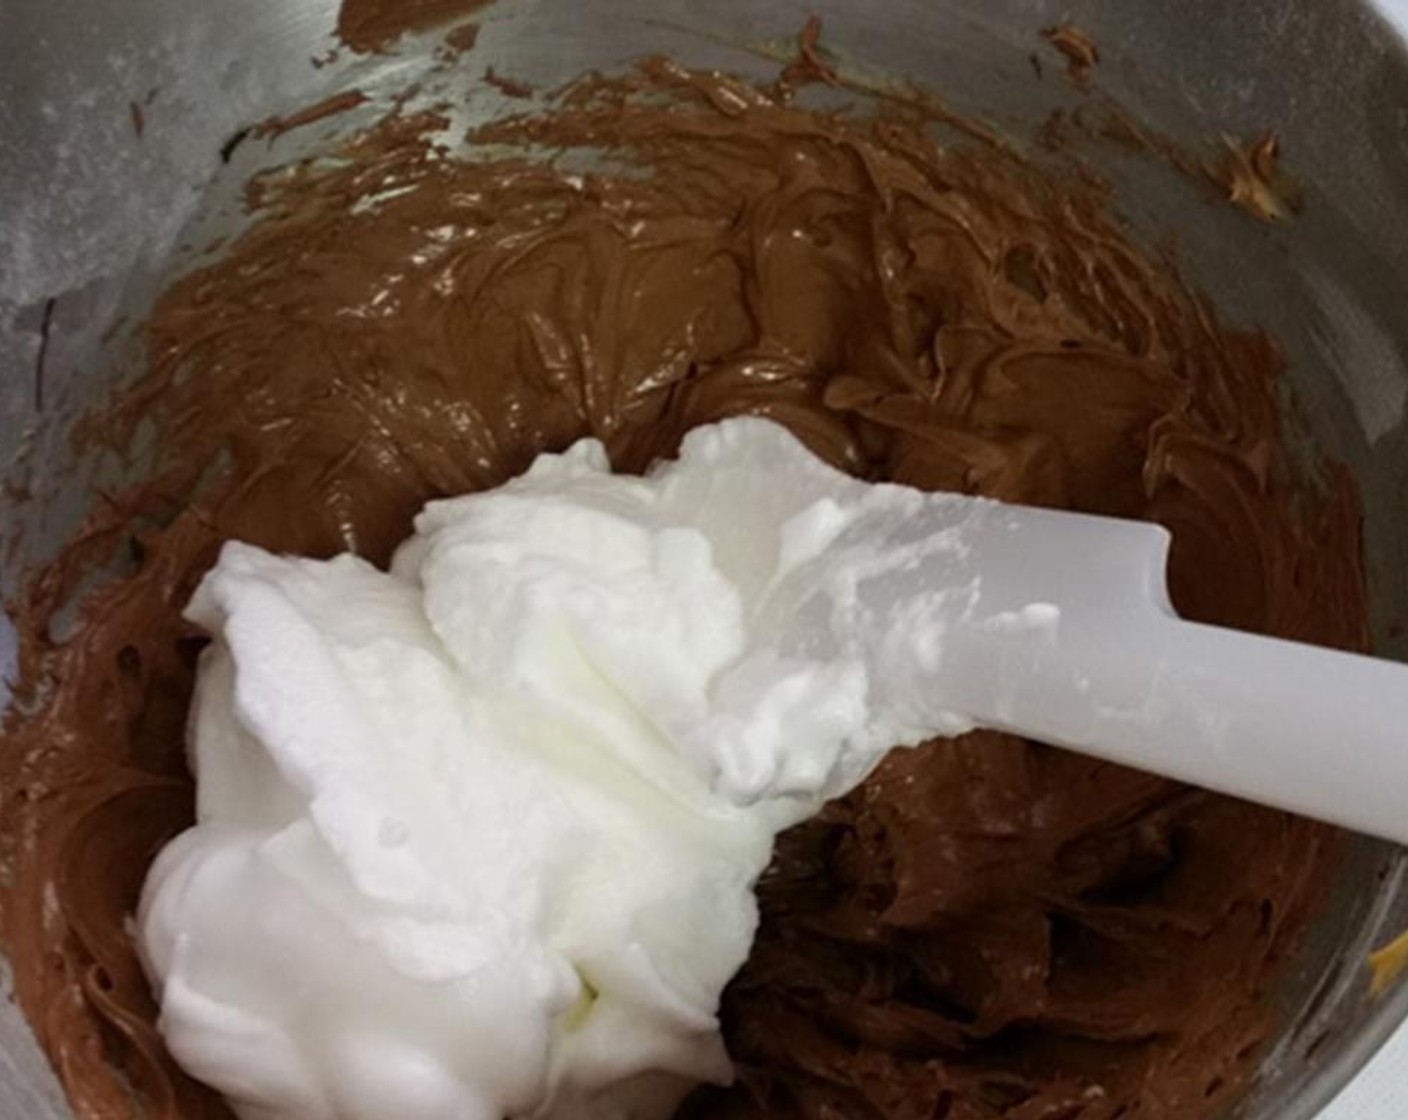 step 7 Vigorously stir about 1/3 of the whipped egg whites into the chocolate mixture to lighten it, then gently fold the remaining egg whites into the chocolate mixture with a spatula until just a few wisps of egg white remain. Do this carefully so as not to deflate the egg whites.